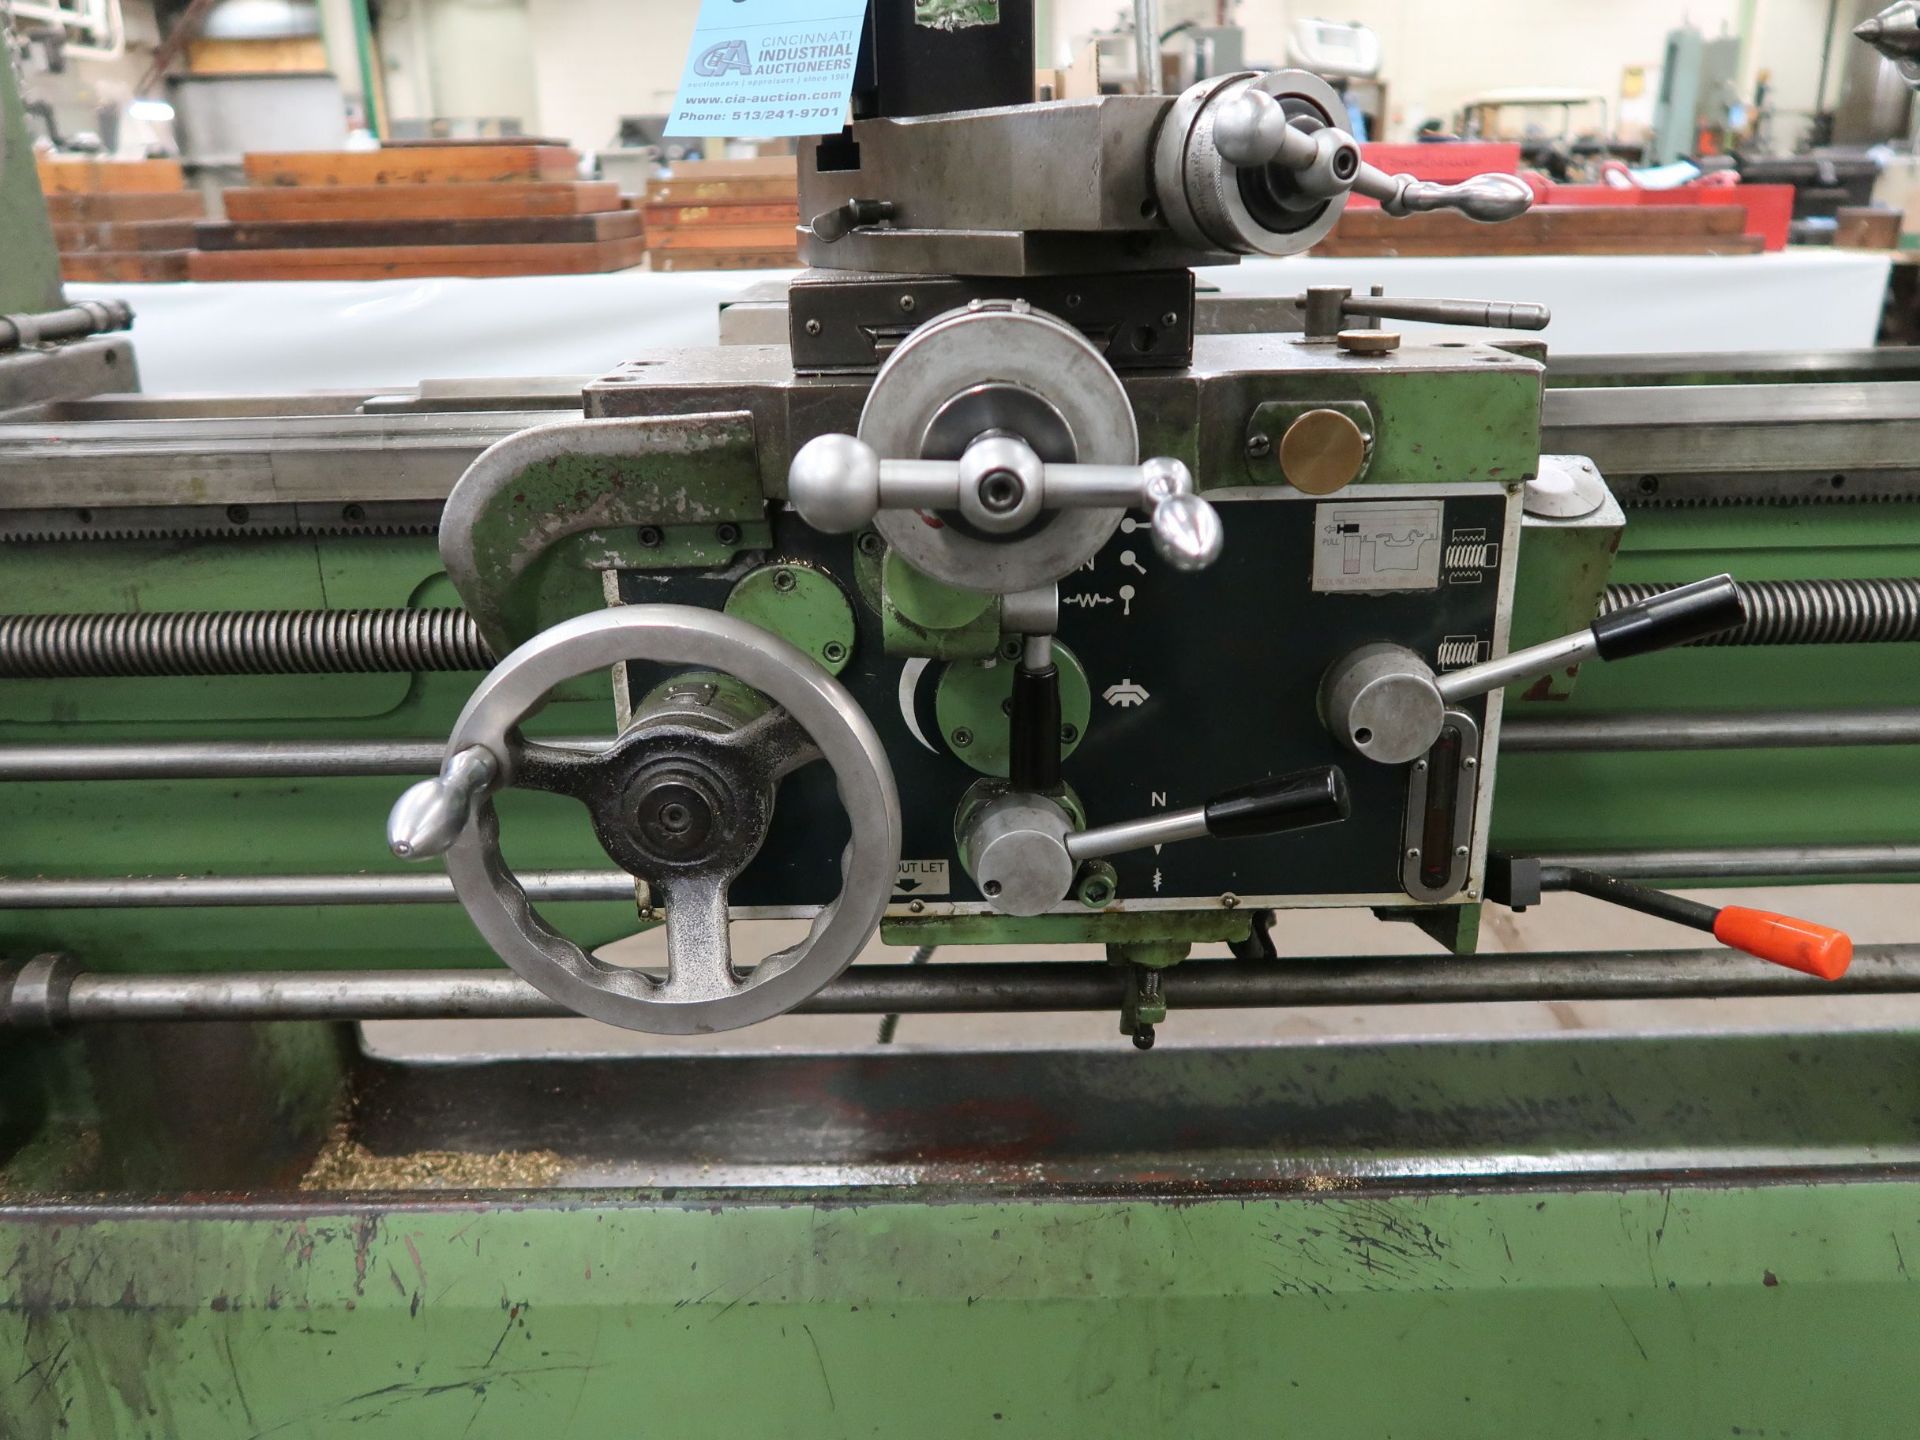 16" X 60" VICTOR MODEL 1660E GEARED HEAD ENGINE LATHE; S/N 971208, SPINDLE SPEED 40-2,000 RPM, TAPER - Image 8 of 12